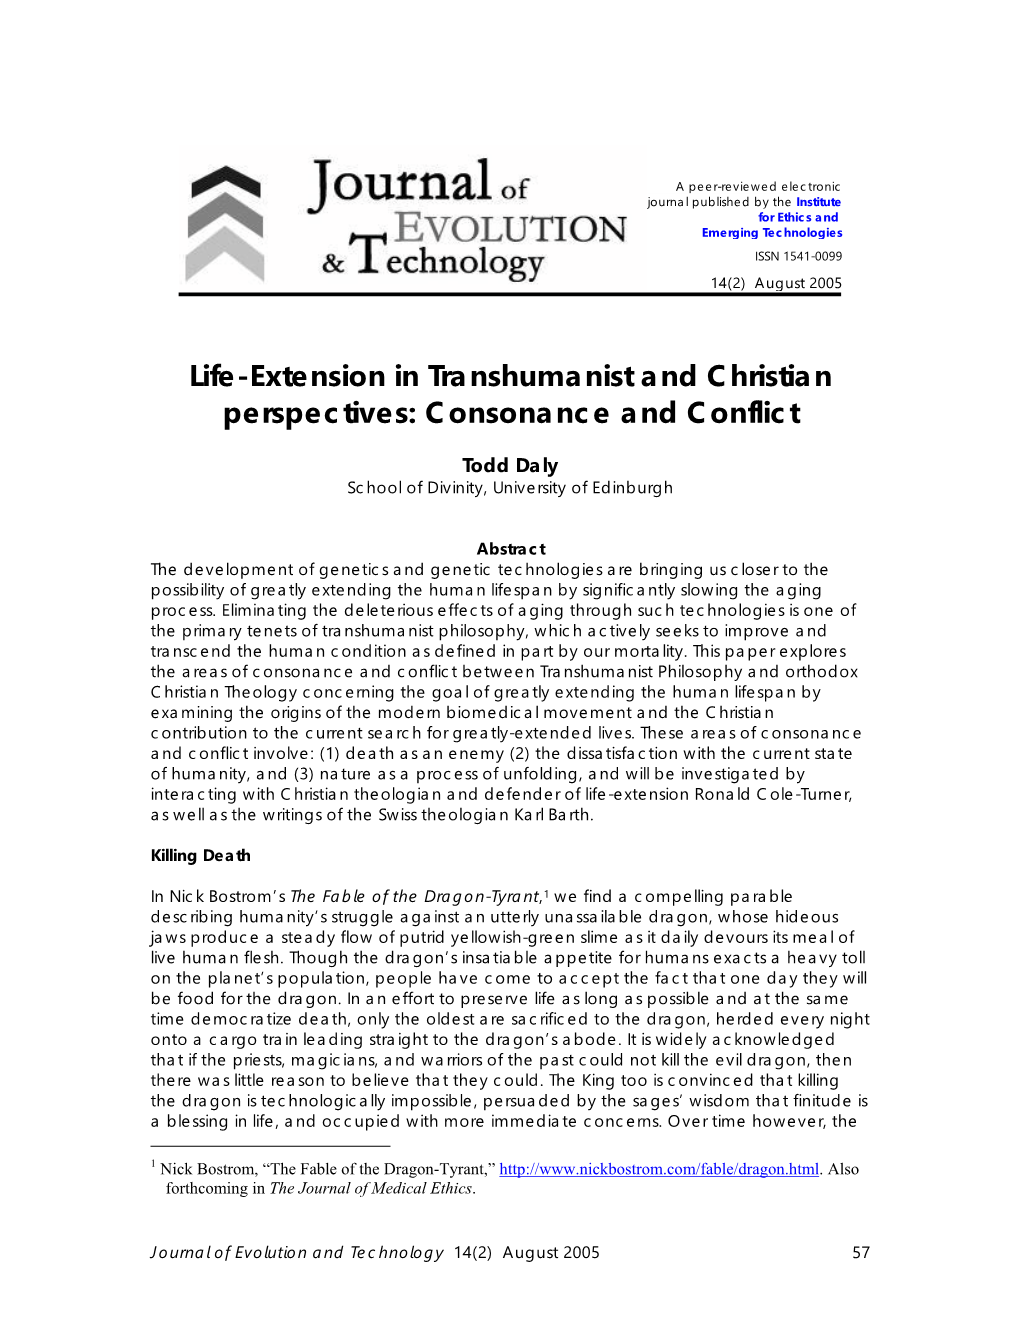 Life-Extension in Christian and Transhumanist Perspectives